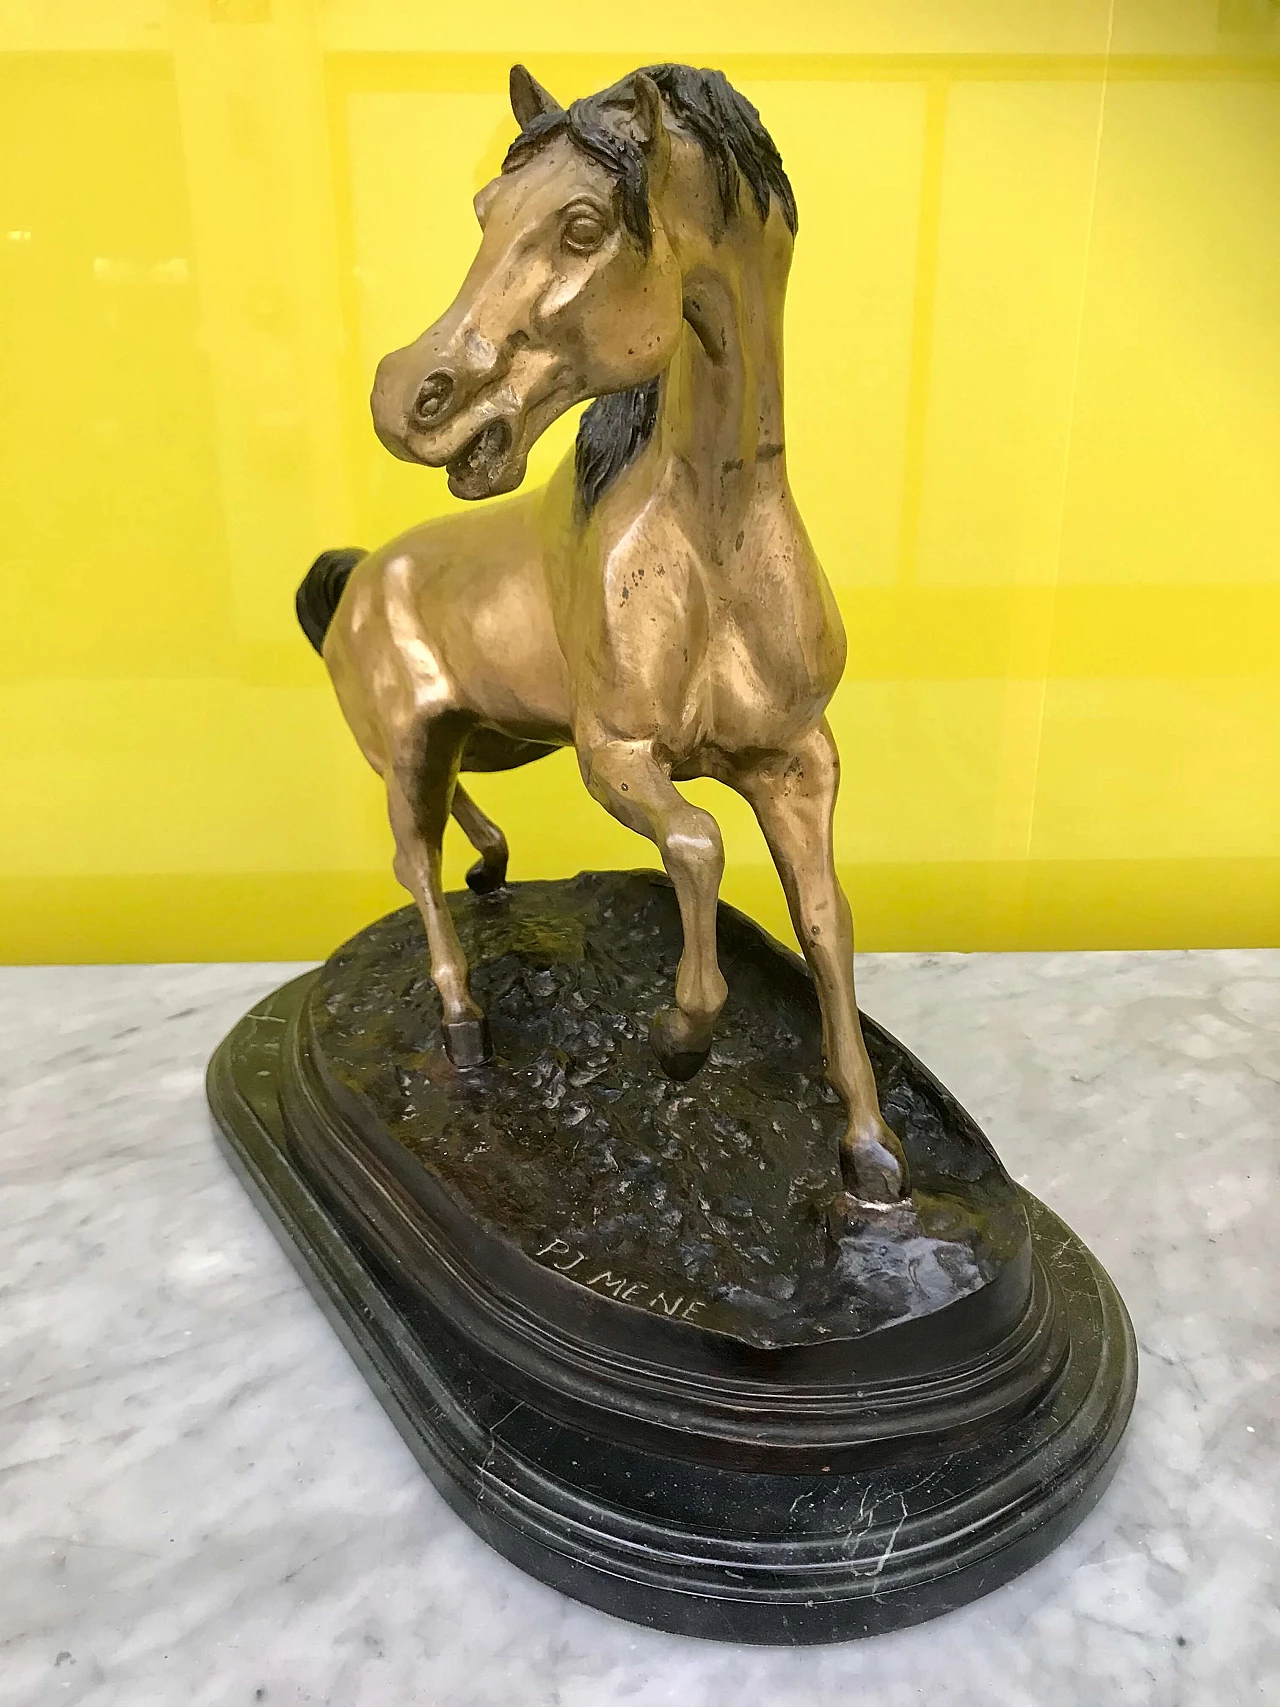 P.J.Mêne, gilded and burnished bronze sculpture of a "Horse" with black marble base, original 19th century 1177733